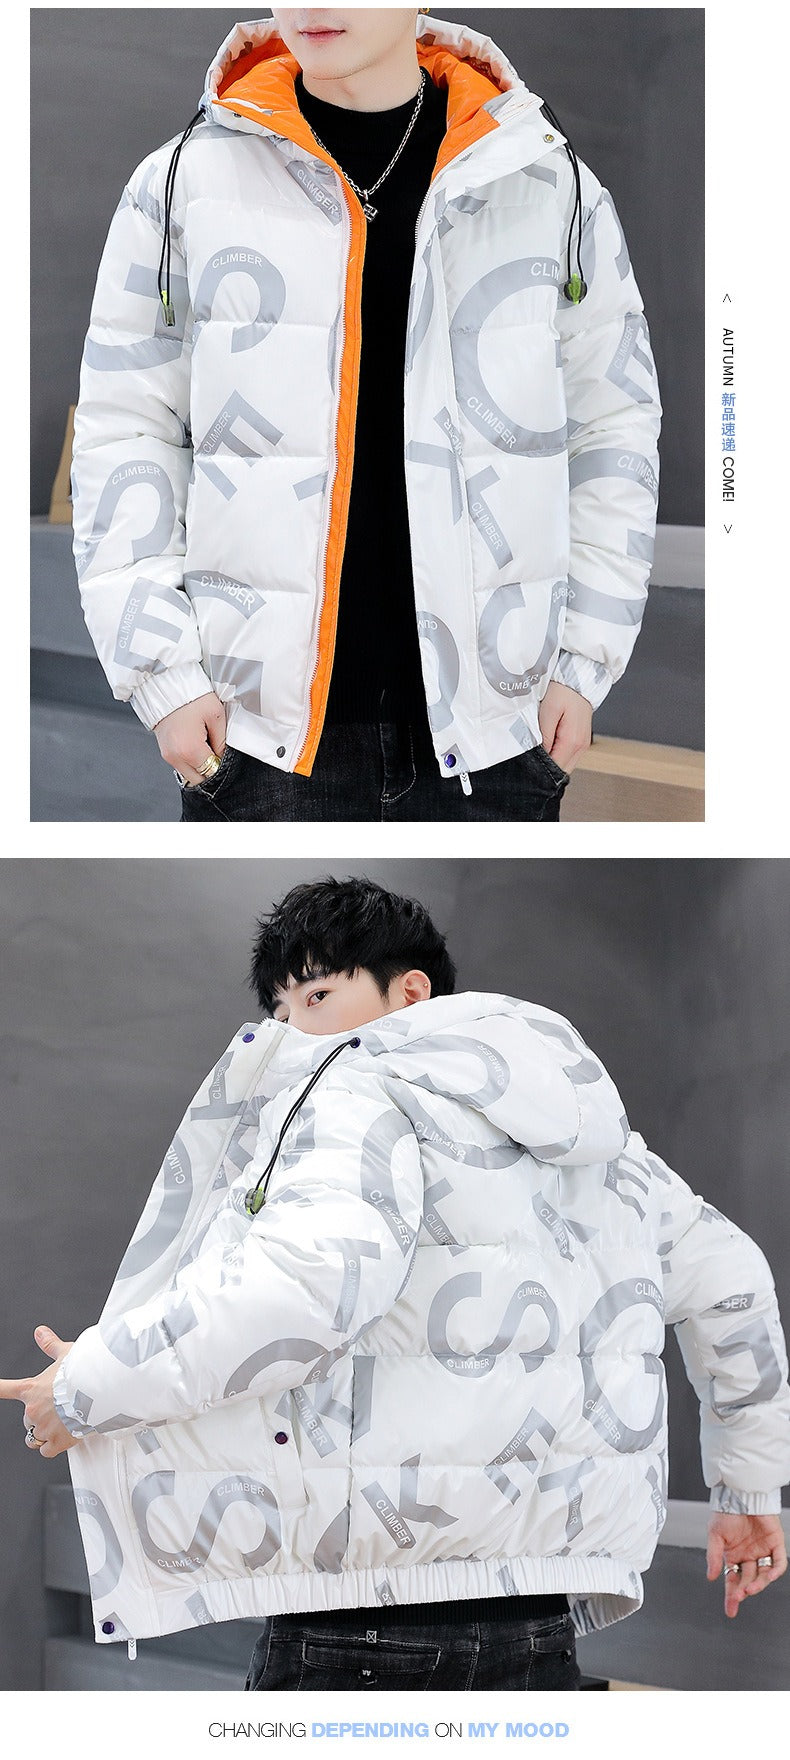 Men's Hooded Bright Leather Winter Jackets Coats Warm Cotton Full Zip Up Puffer Jacket | C890